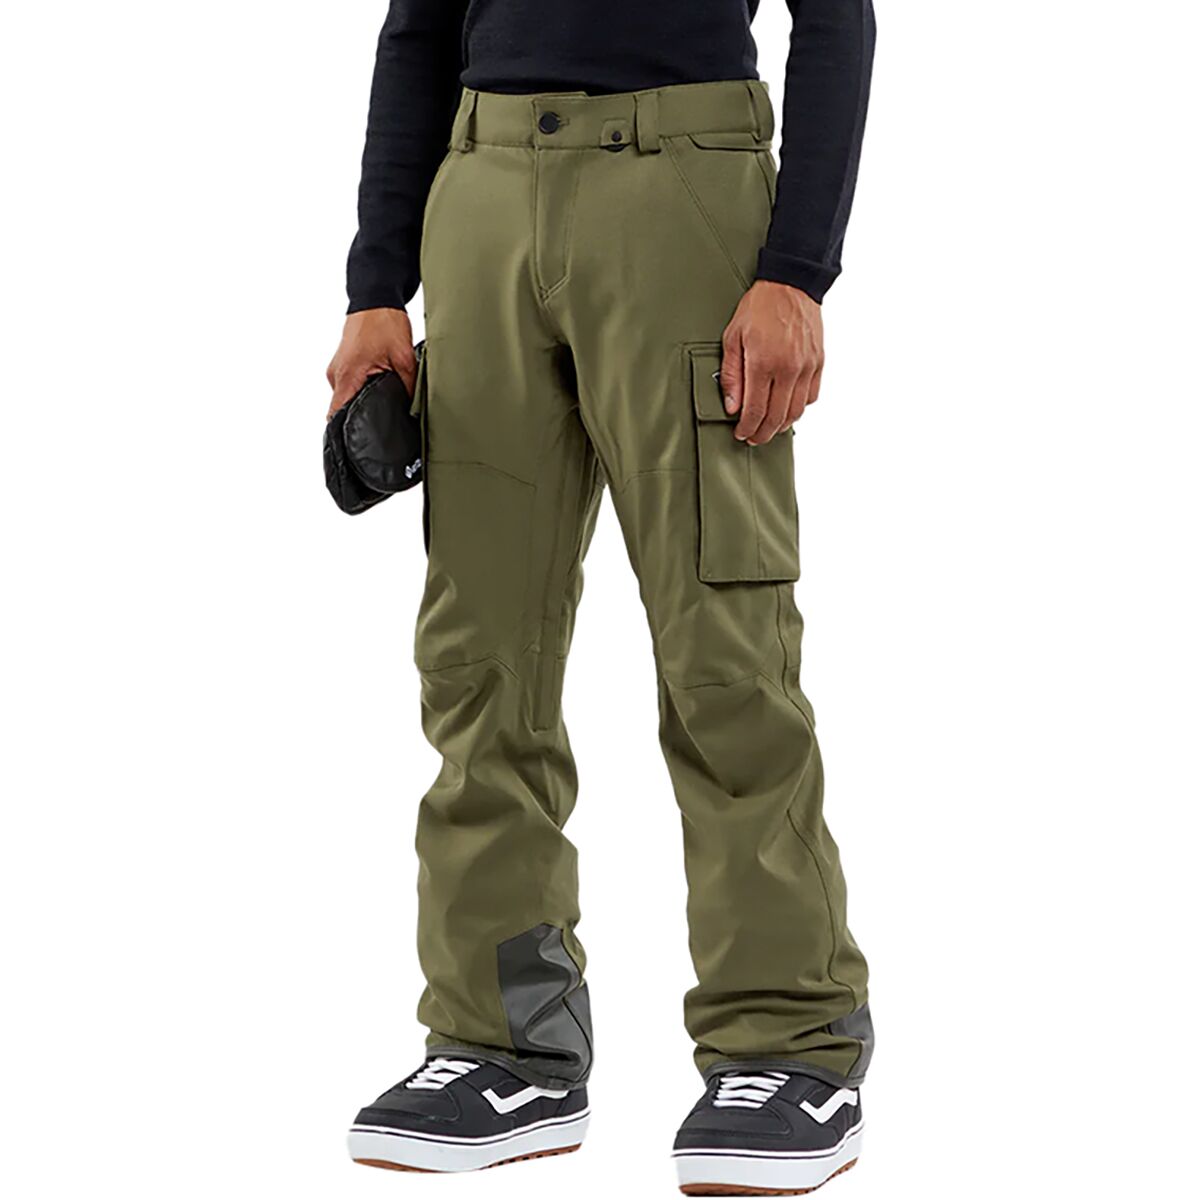 Volcom New Articulated Pant - Men's Military